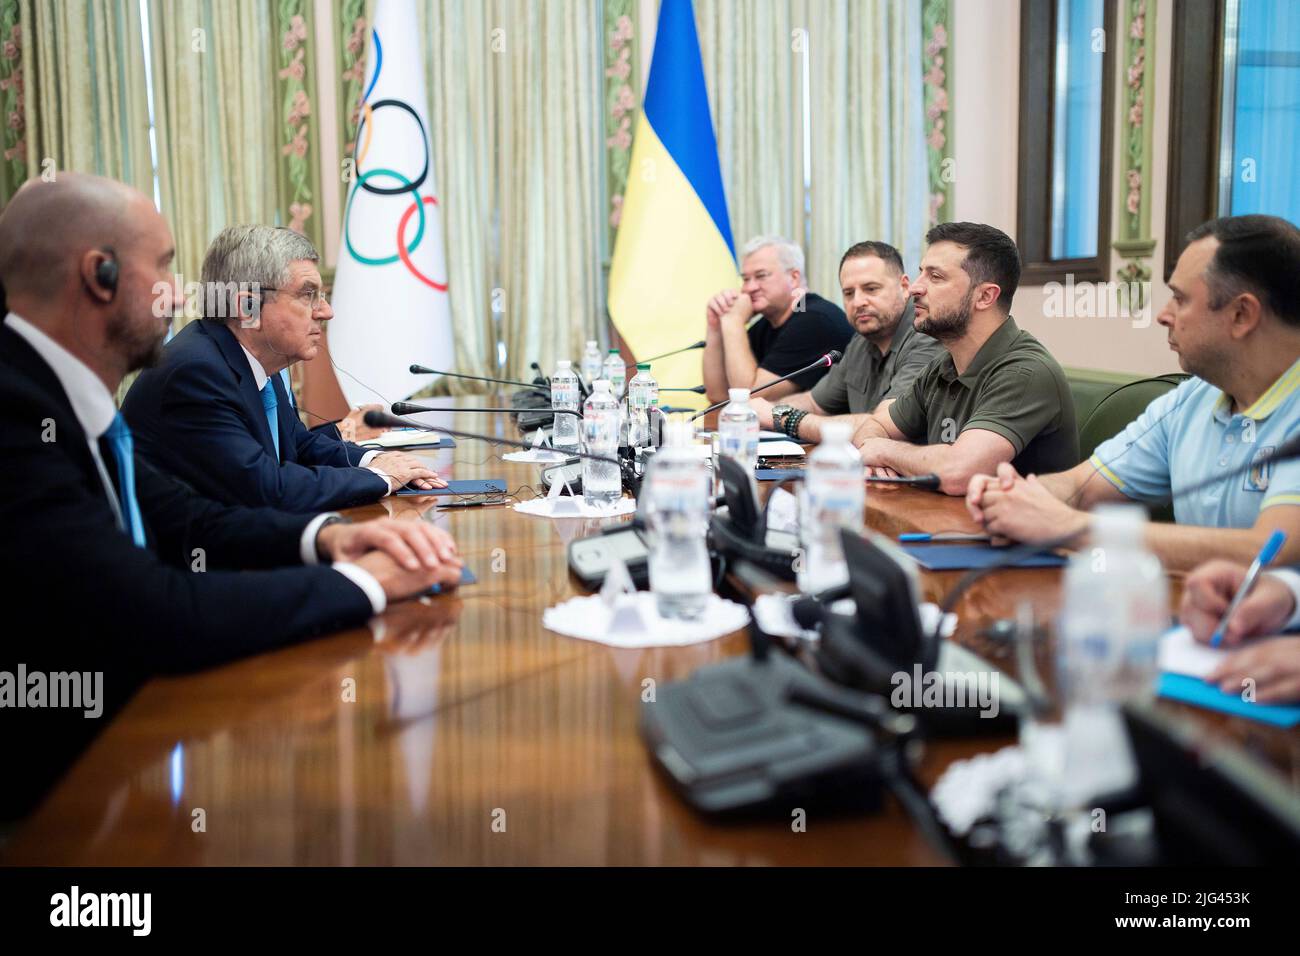 Kyiv, Ukraine. 03 July, 2022. Ukrainian President Volodymyr Zelenskyy, right, and delegations during a face-to-face bilateral meeting with International Olympic Committee President Thomas Bach, left, at the Mariinskyi Palace, July 3, 2022 in Kyiv, Ukraine.  Credit: Ukraine Presidency/Ukrainian Presidential Press Office/Alamy Live News Stock Photo